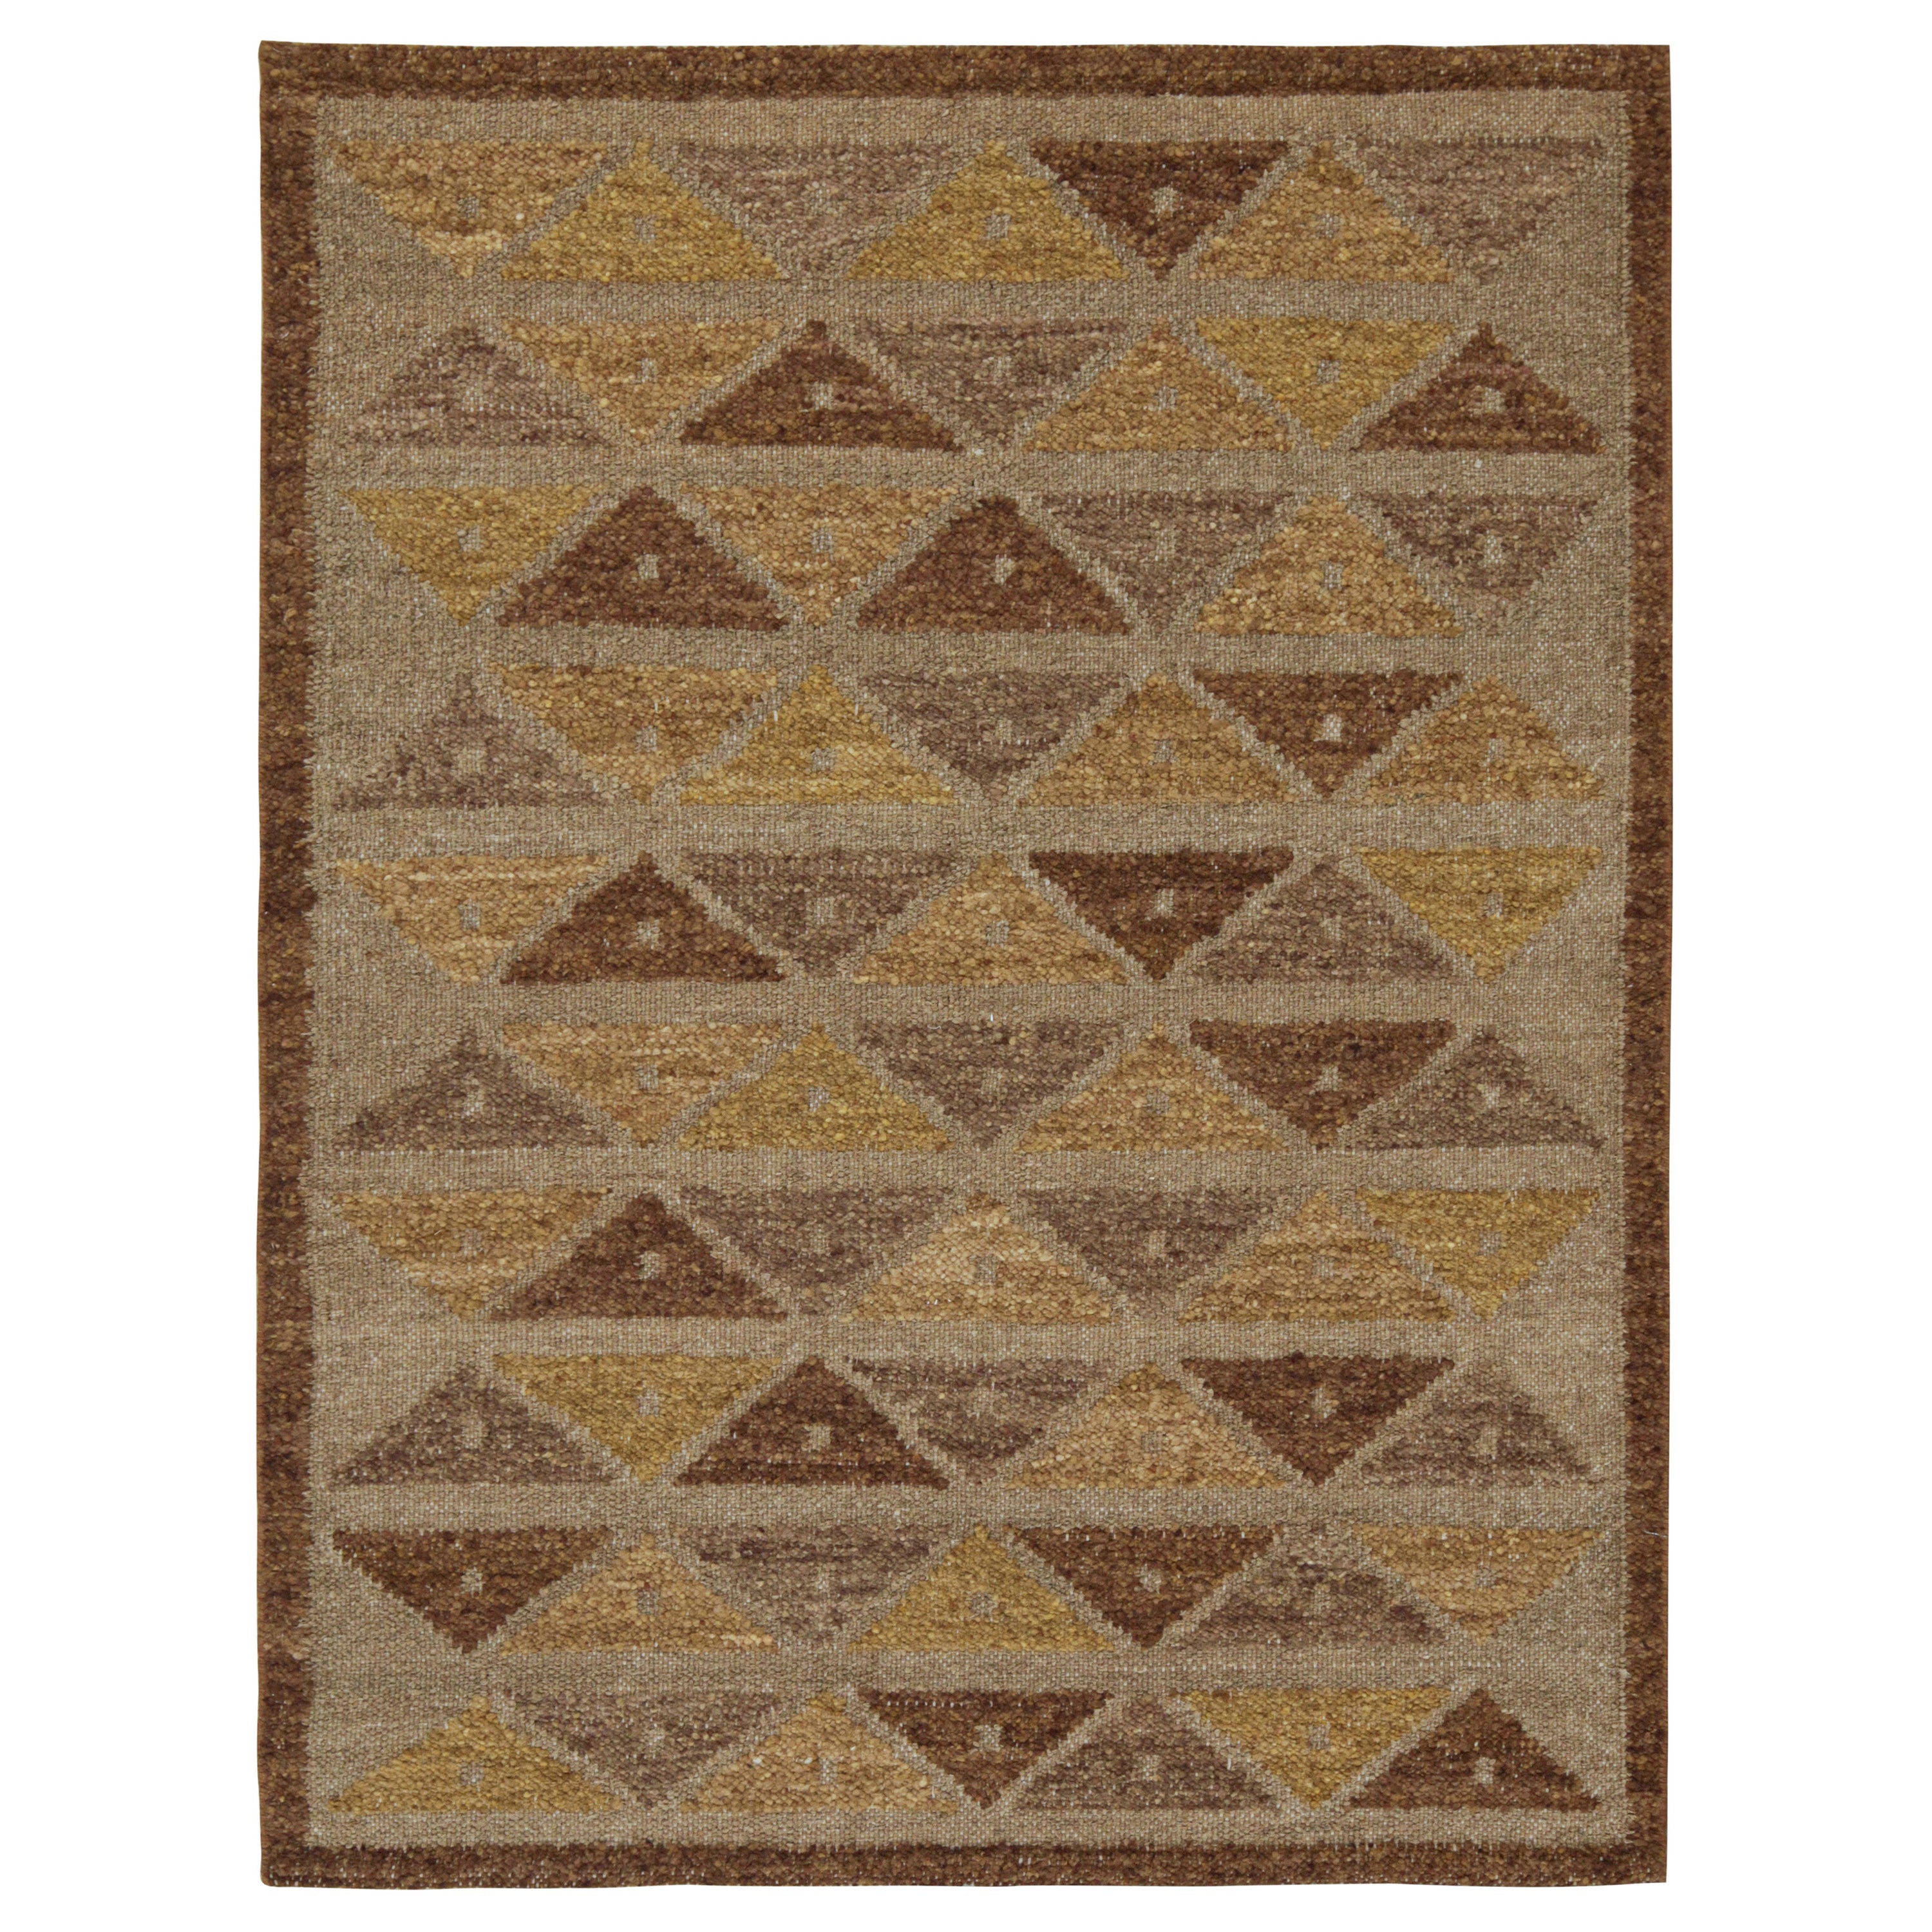 Rug & Kilim’s Scandinavian Style Kilim with Brown & Gold Geometric Patterns For Sale